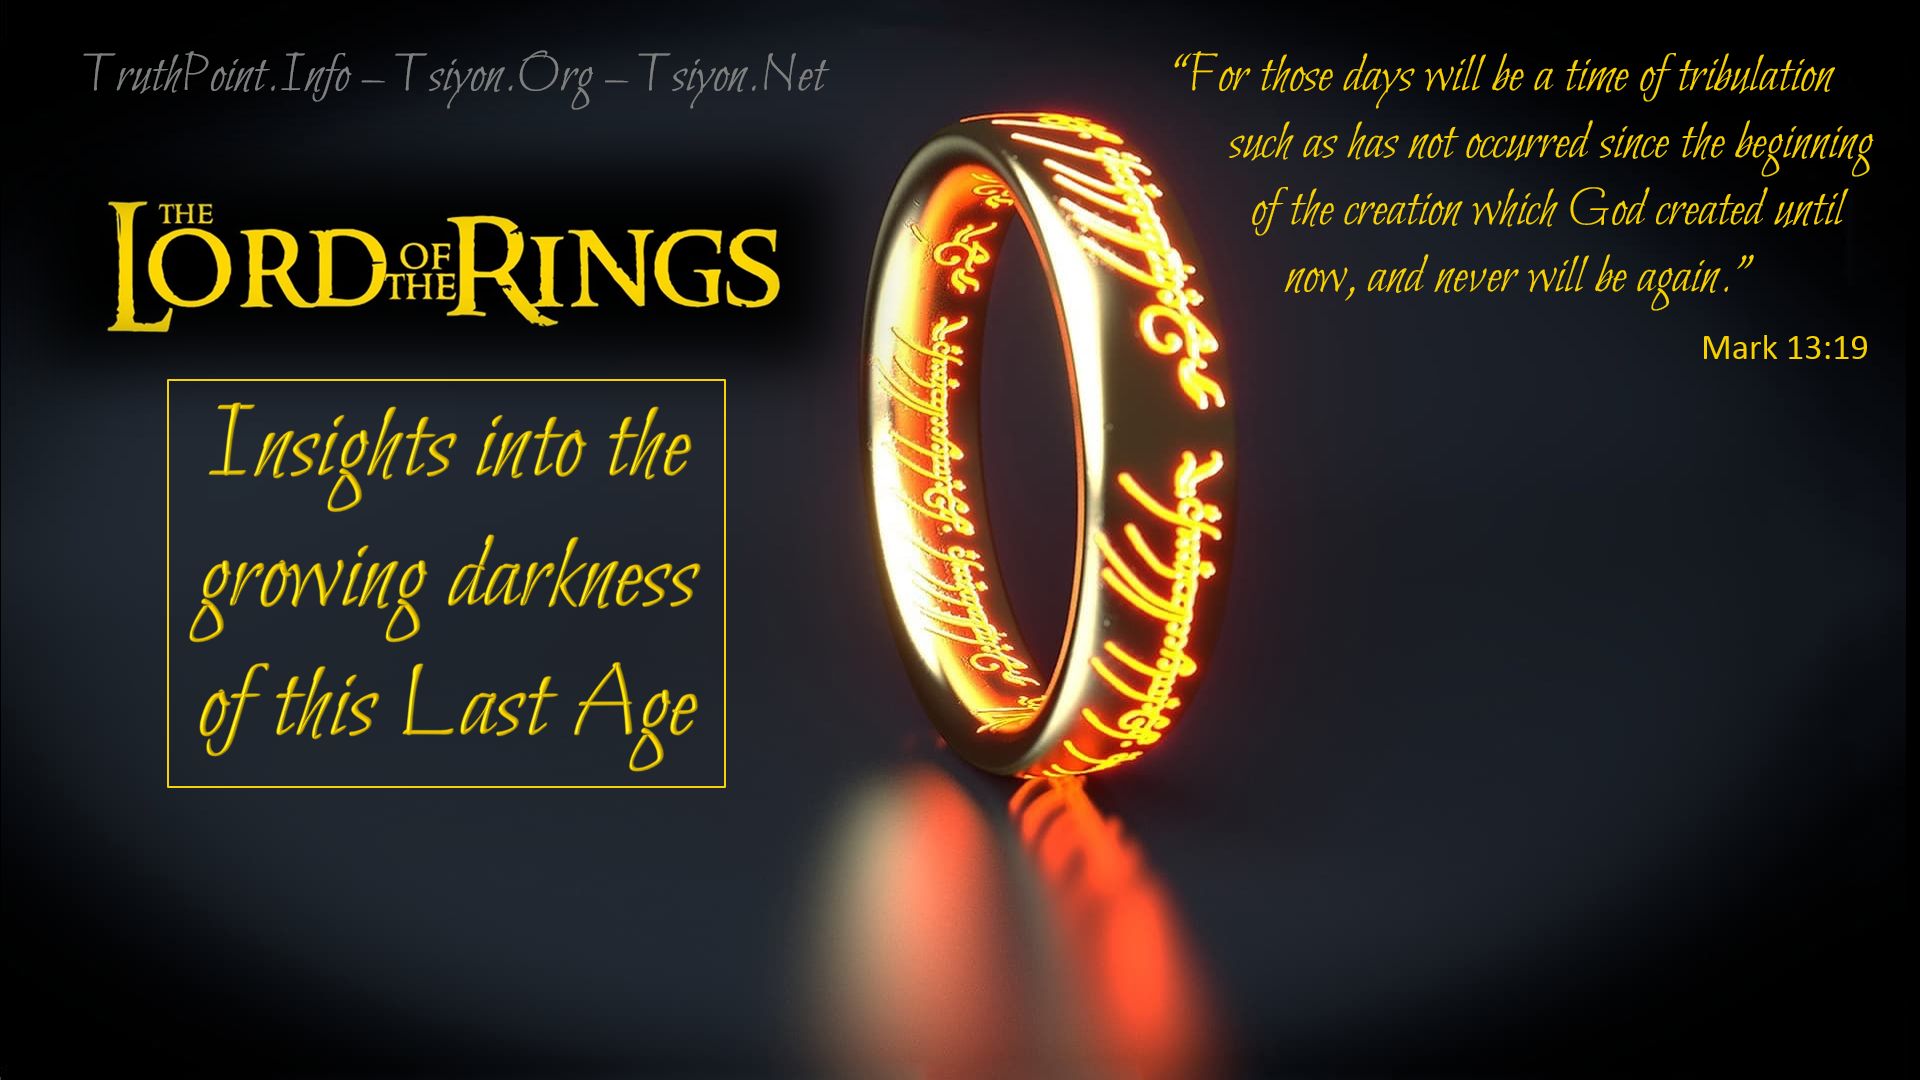 Lord of the Rings image inviting you to attend a live streamed meeting this evening